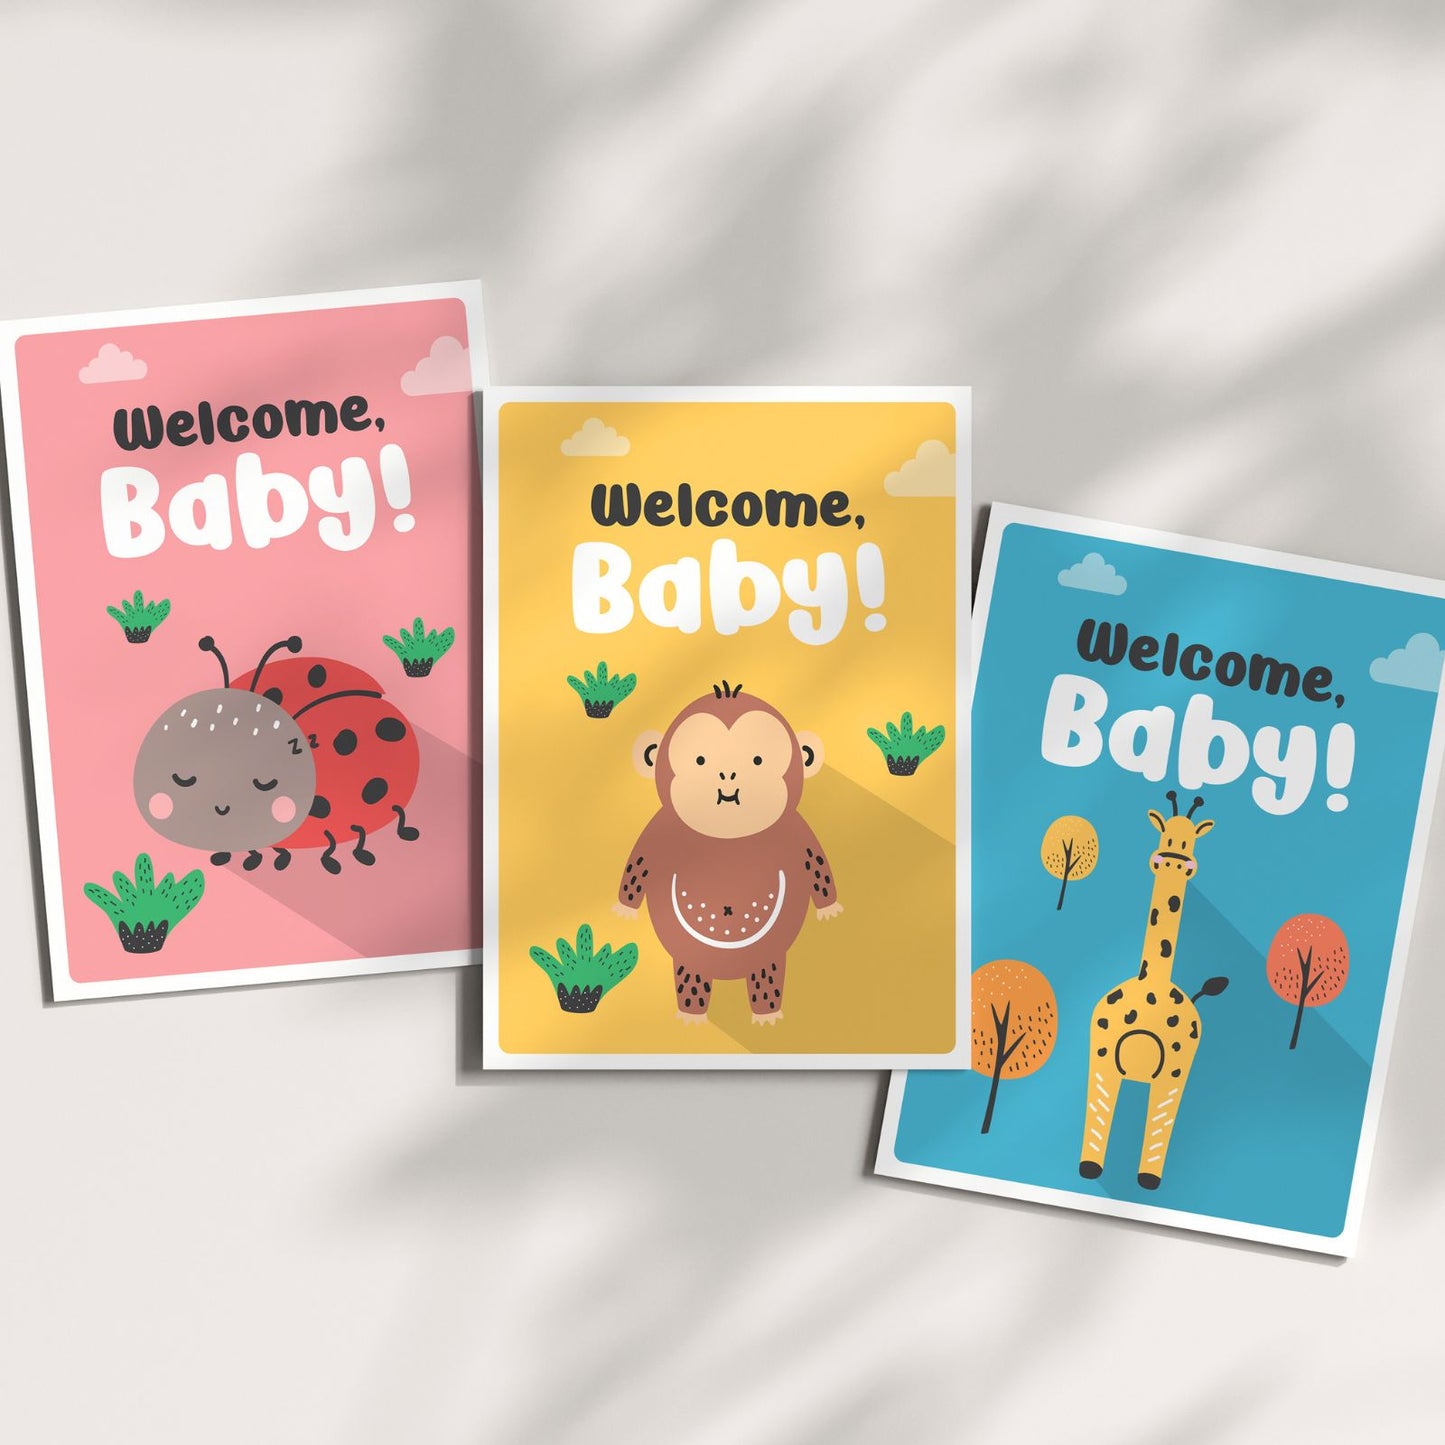 "Welcome, Baby" Greeting Card